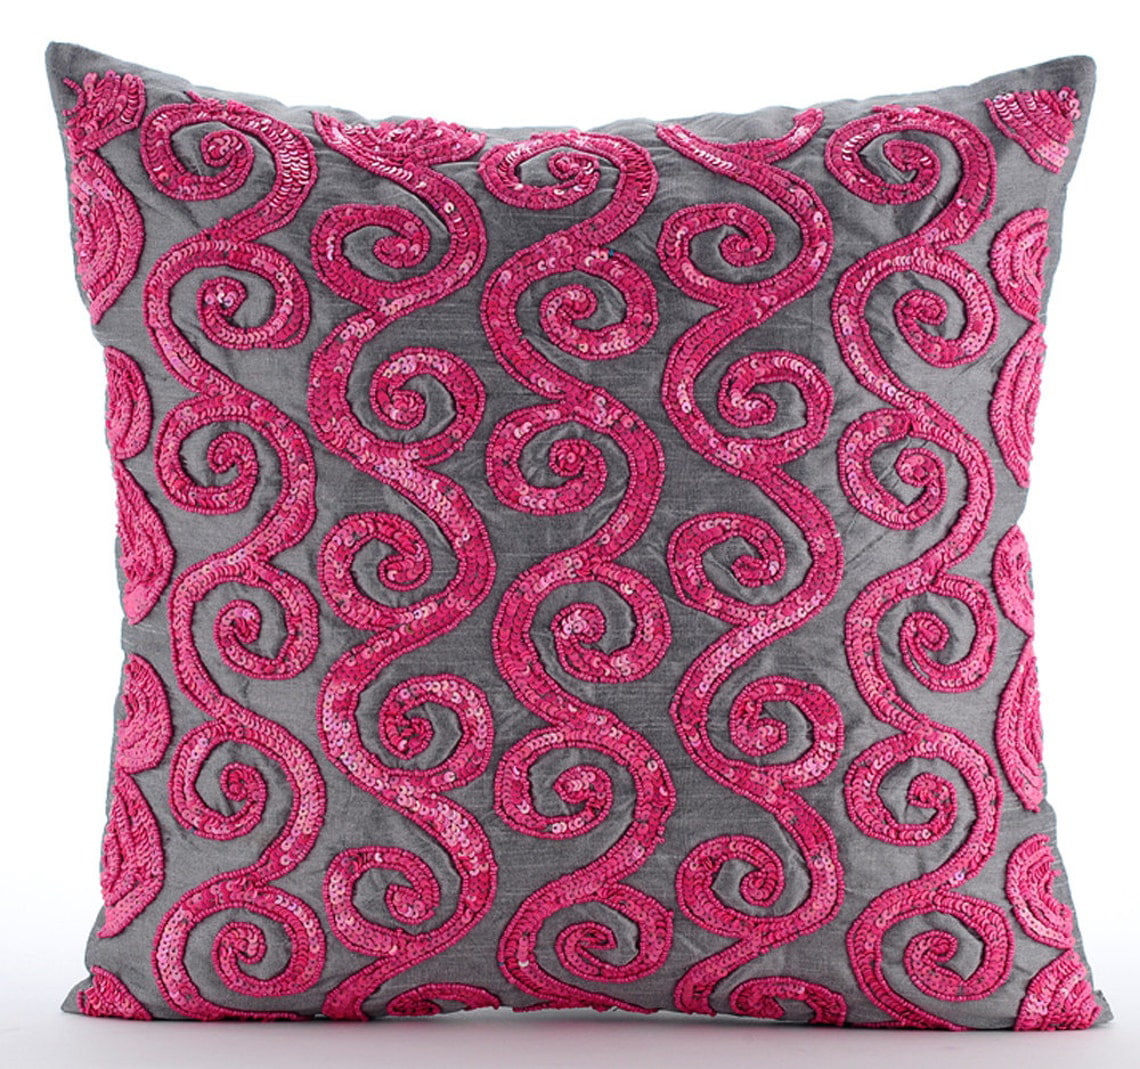 HWY 50 Coral Pink Decorative Throw Pillows Covers Set 18x18 Inch for Couch  Sofa Living Room Bed, Cashmere Soft Comfortable Solid Throw Pillow Case  Cushion Cover Pack of 2 : Home & Kitchen 